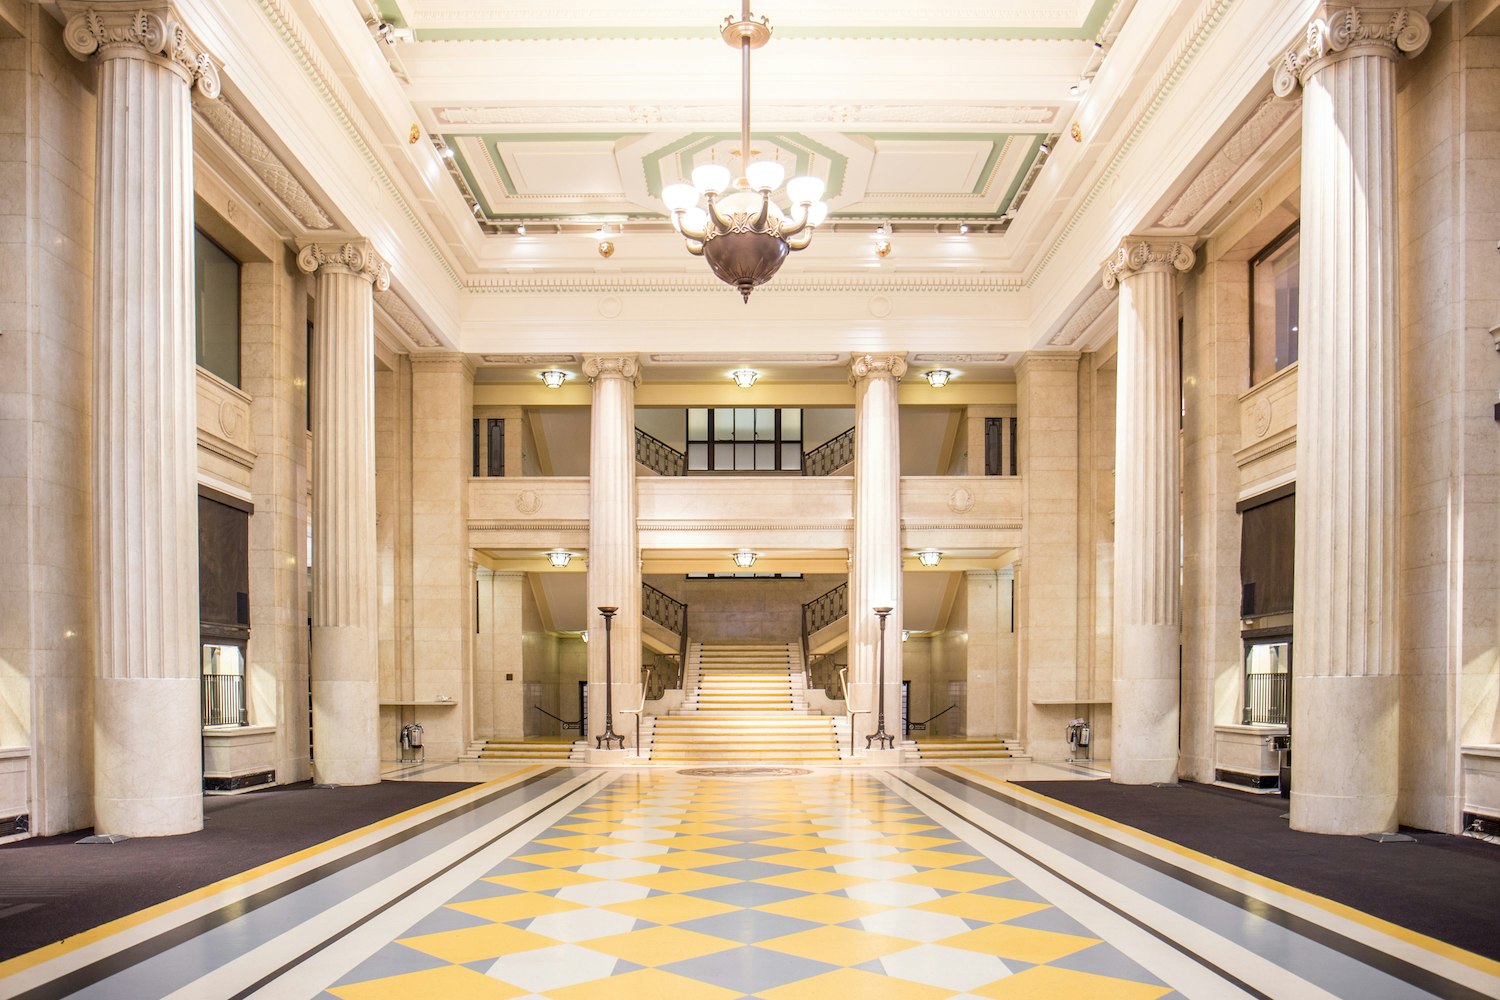 Large Venues in London - The Banking Hall